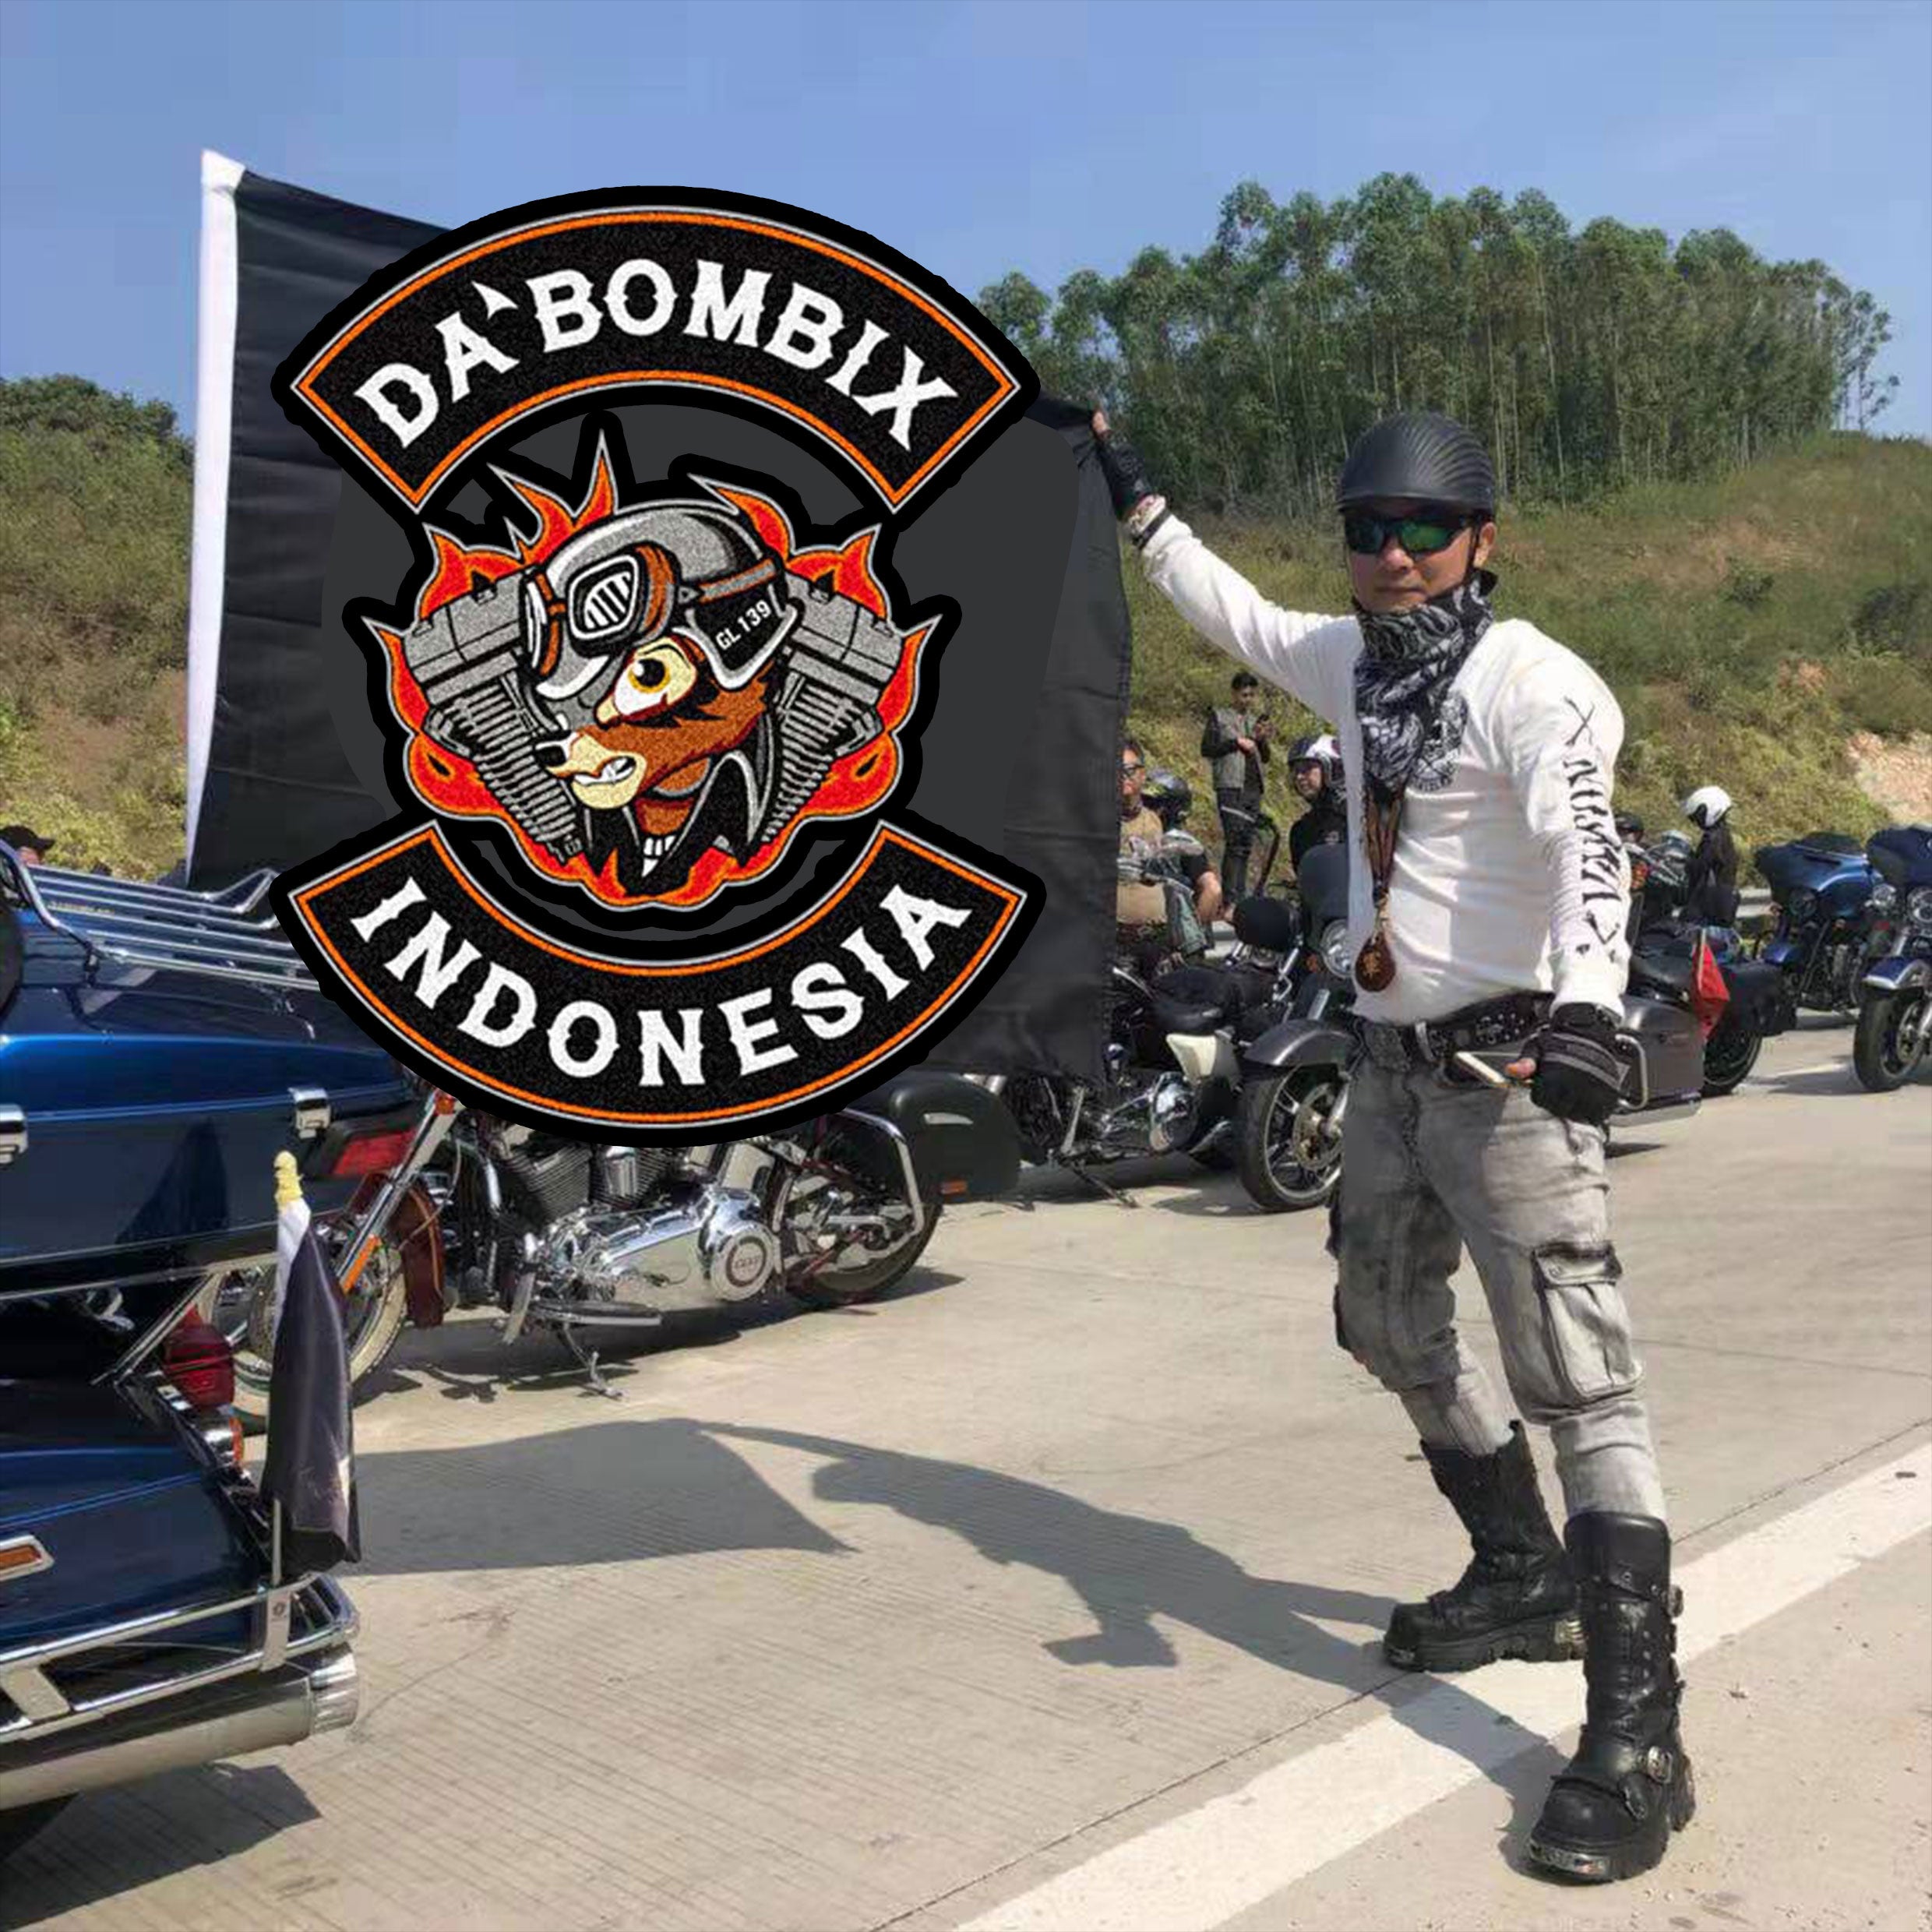 Crafting Unity, Riding in Style: The Da' Bombix Indonesia MC Club Design Story